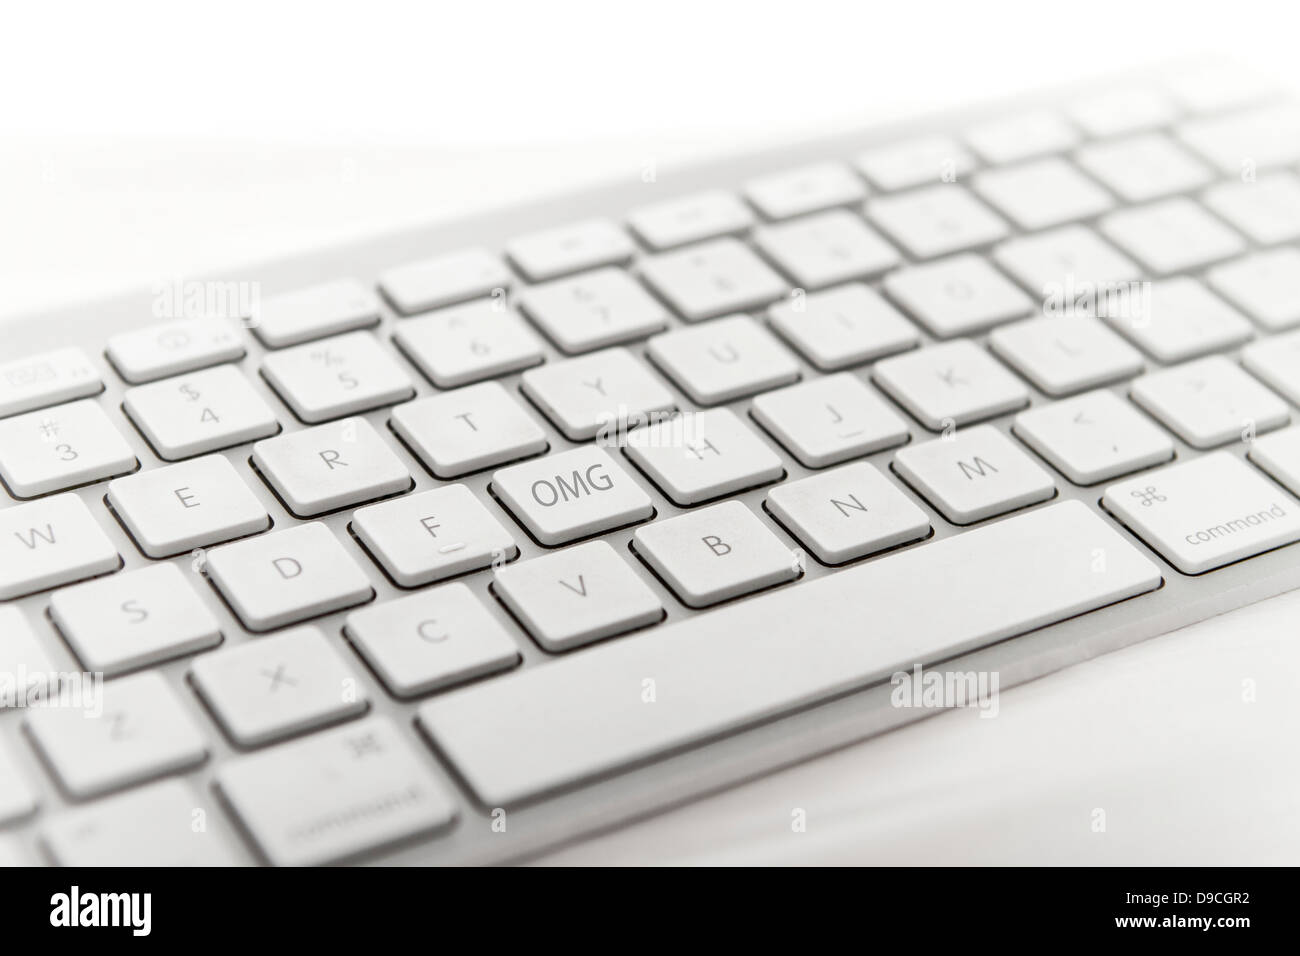 Apple wireless computer keyboard with one key changed to show the abbreviation OMG (oh my god) Stock Photo